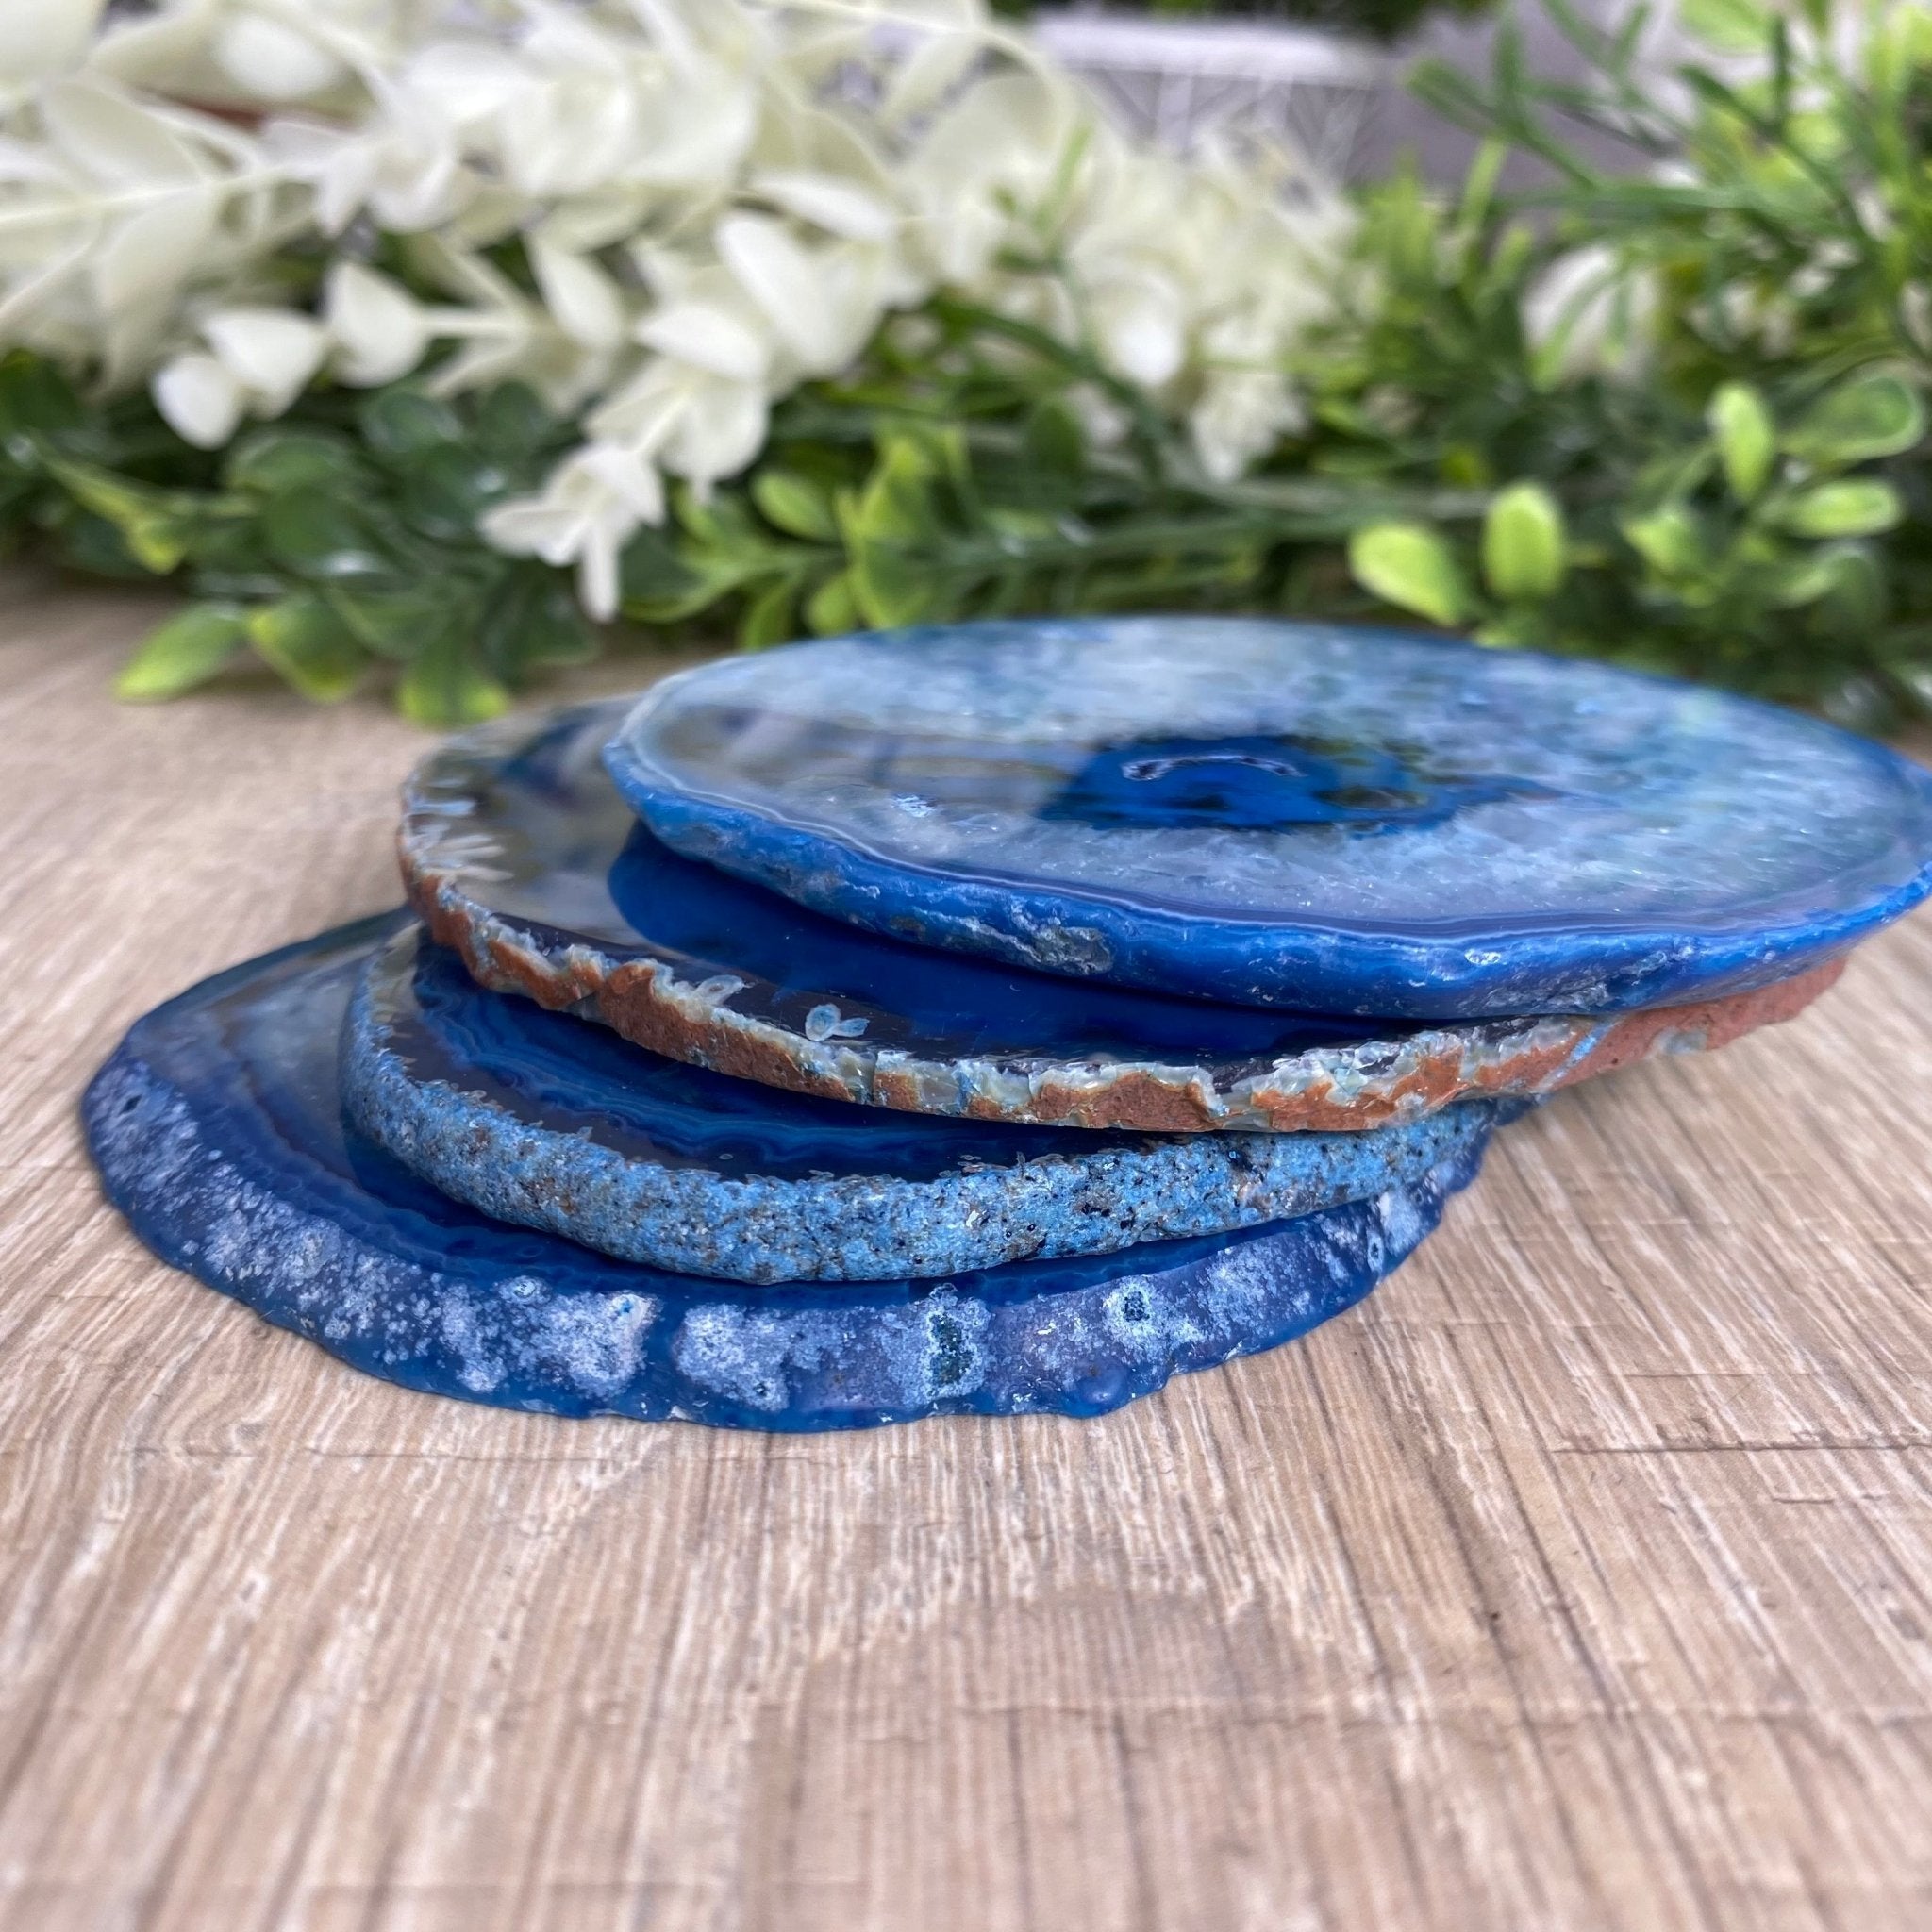 Blue Agate Coasters w/ silicone bumpers, 3.5" to 4.5" each, 4-piece set Model #5204BLUE by Brazil Gems - Brazil GemsBrazil GemsBlue Agate Coasters w/ silicone bumpers, 3.5" to 4.5" each, 4-piece set Model #5204BLUE by Brazil GemsCoaster Sets5204BLUE